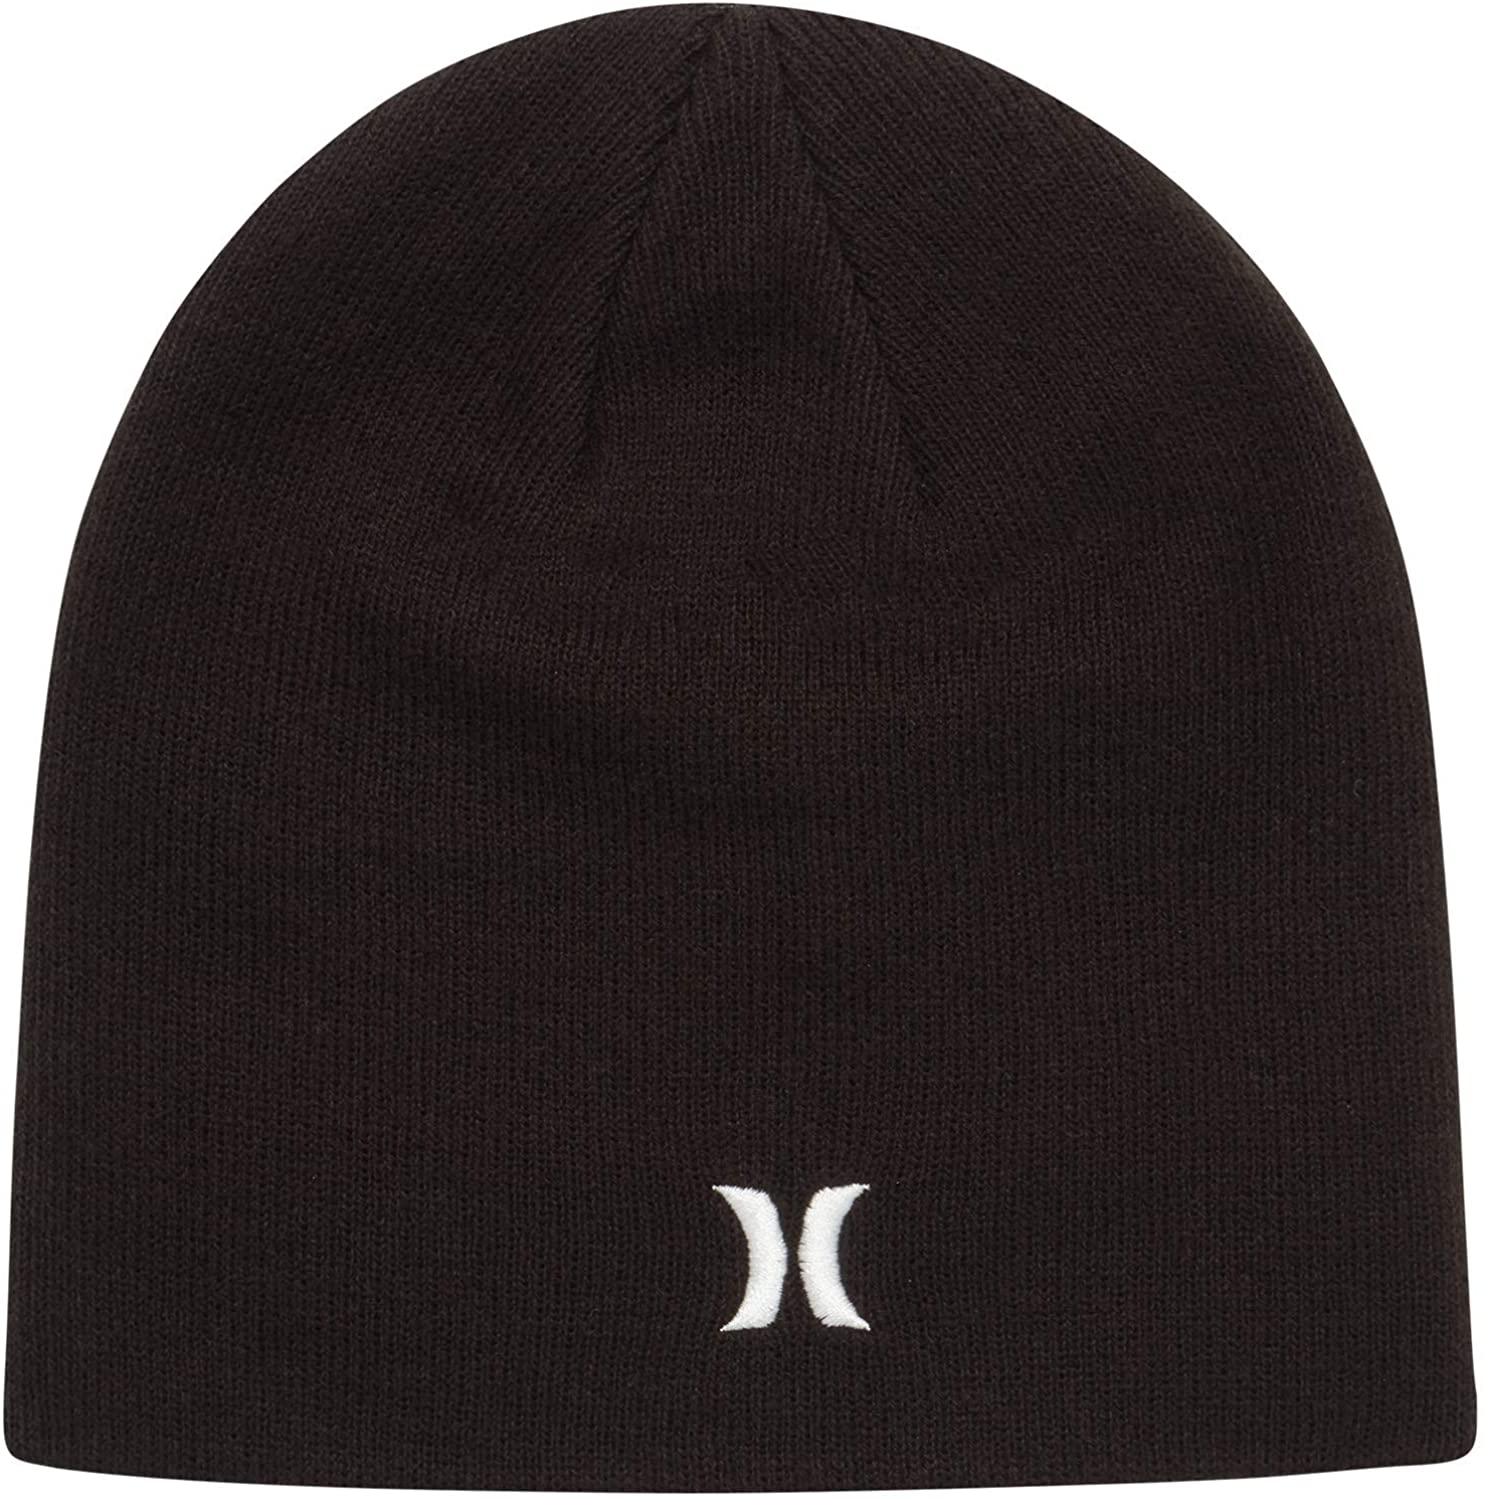 Hurley Black Icon Classic and Black Icon Cuffed Men's Beanie (2 Pack)